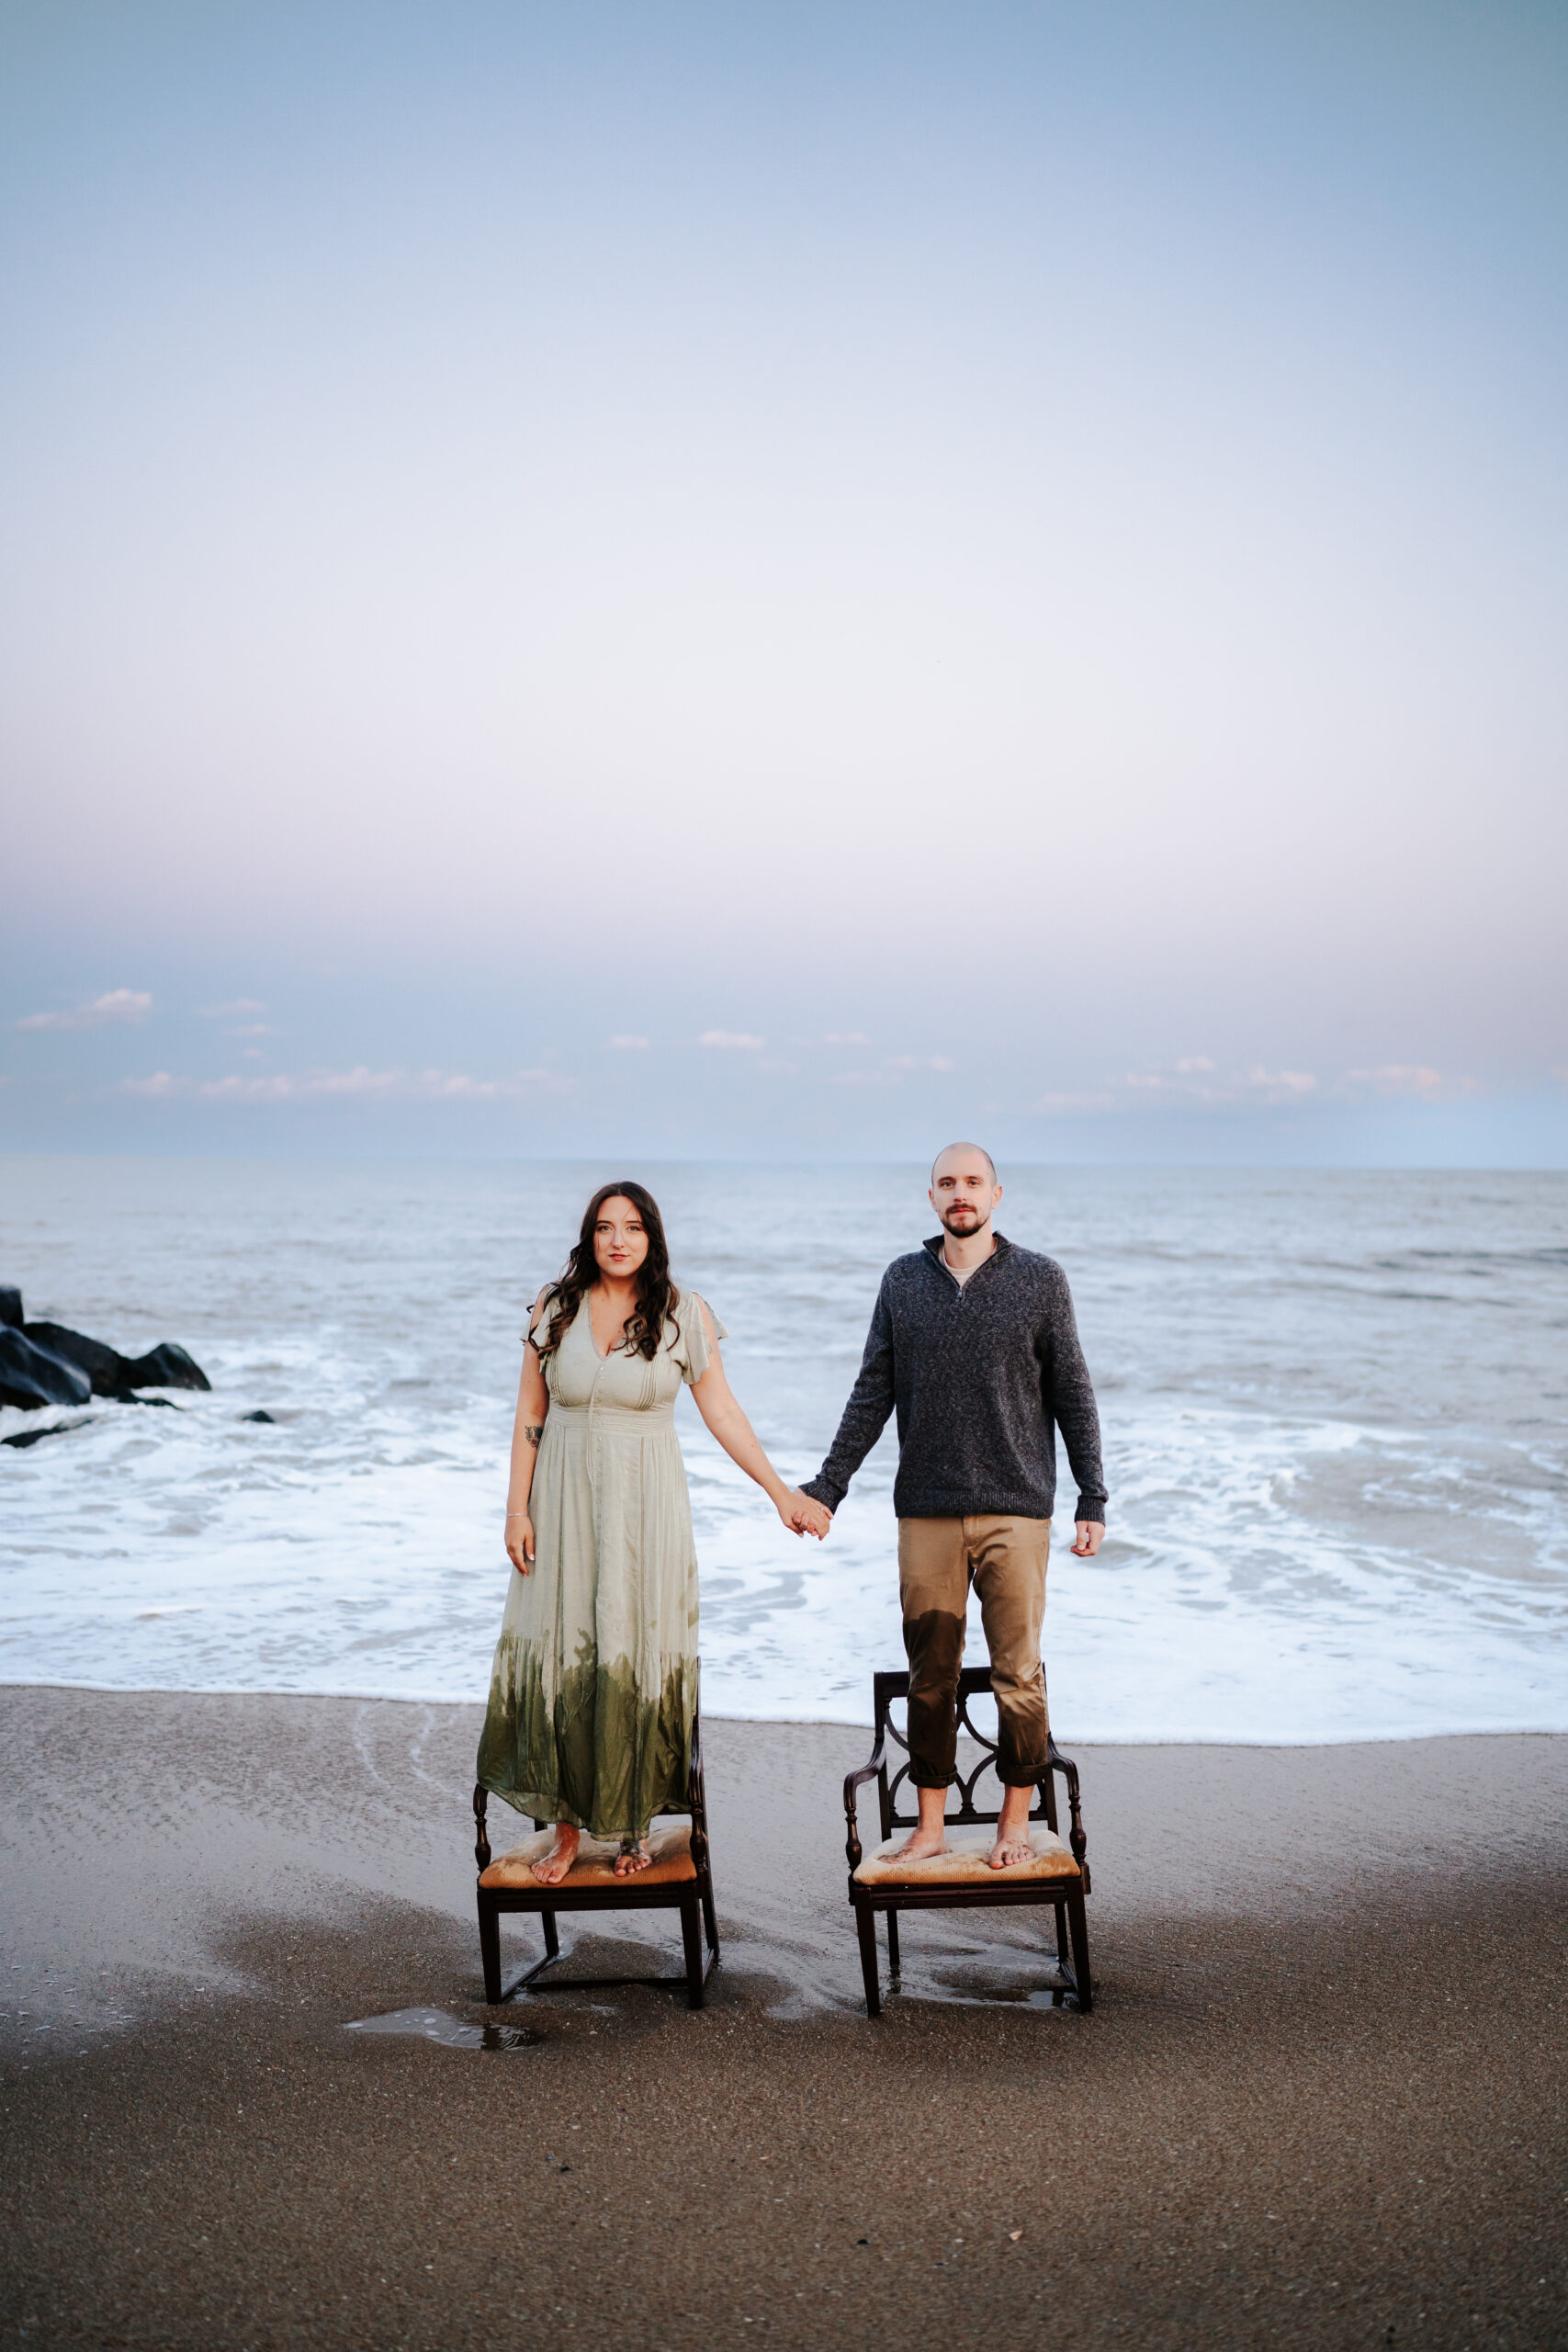 Fall Beach Engagement Photos Maryland Wedding Photographer unique chairs in ocean vibe in Asbury Park NJ